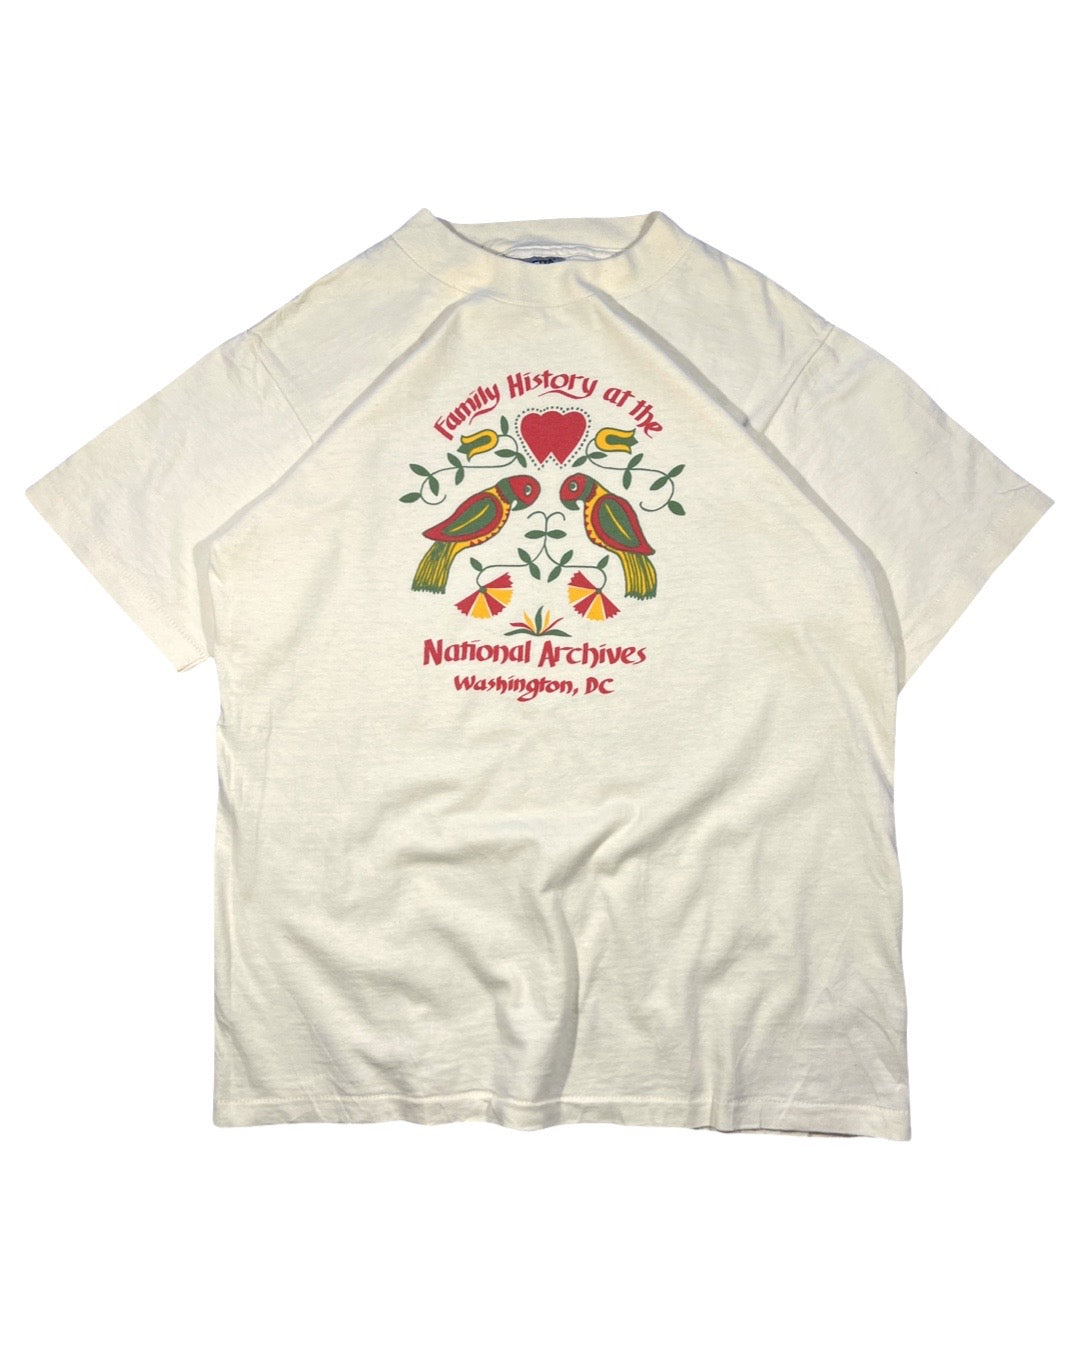 Vintage National Archive Tee - M